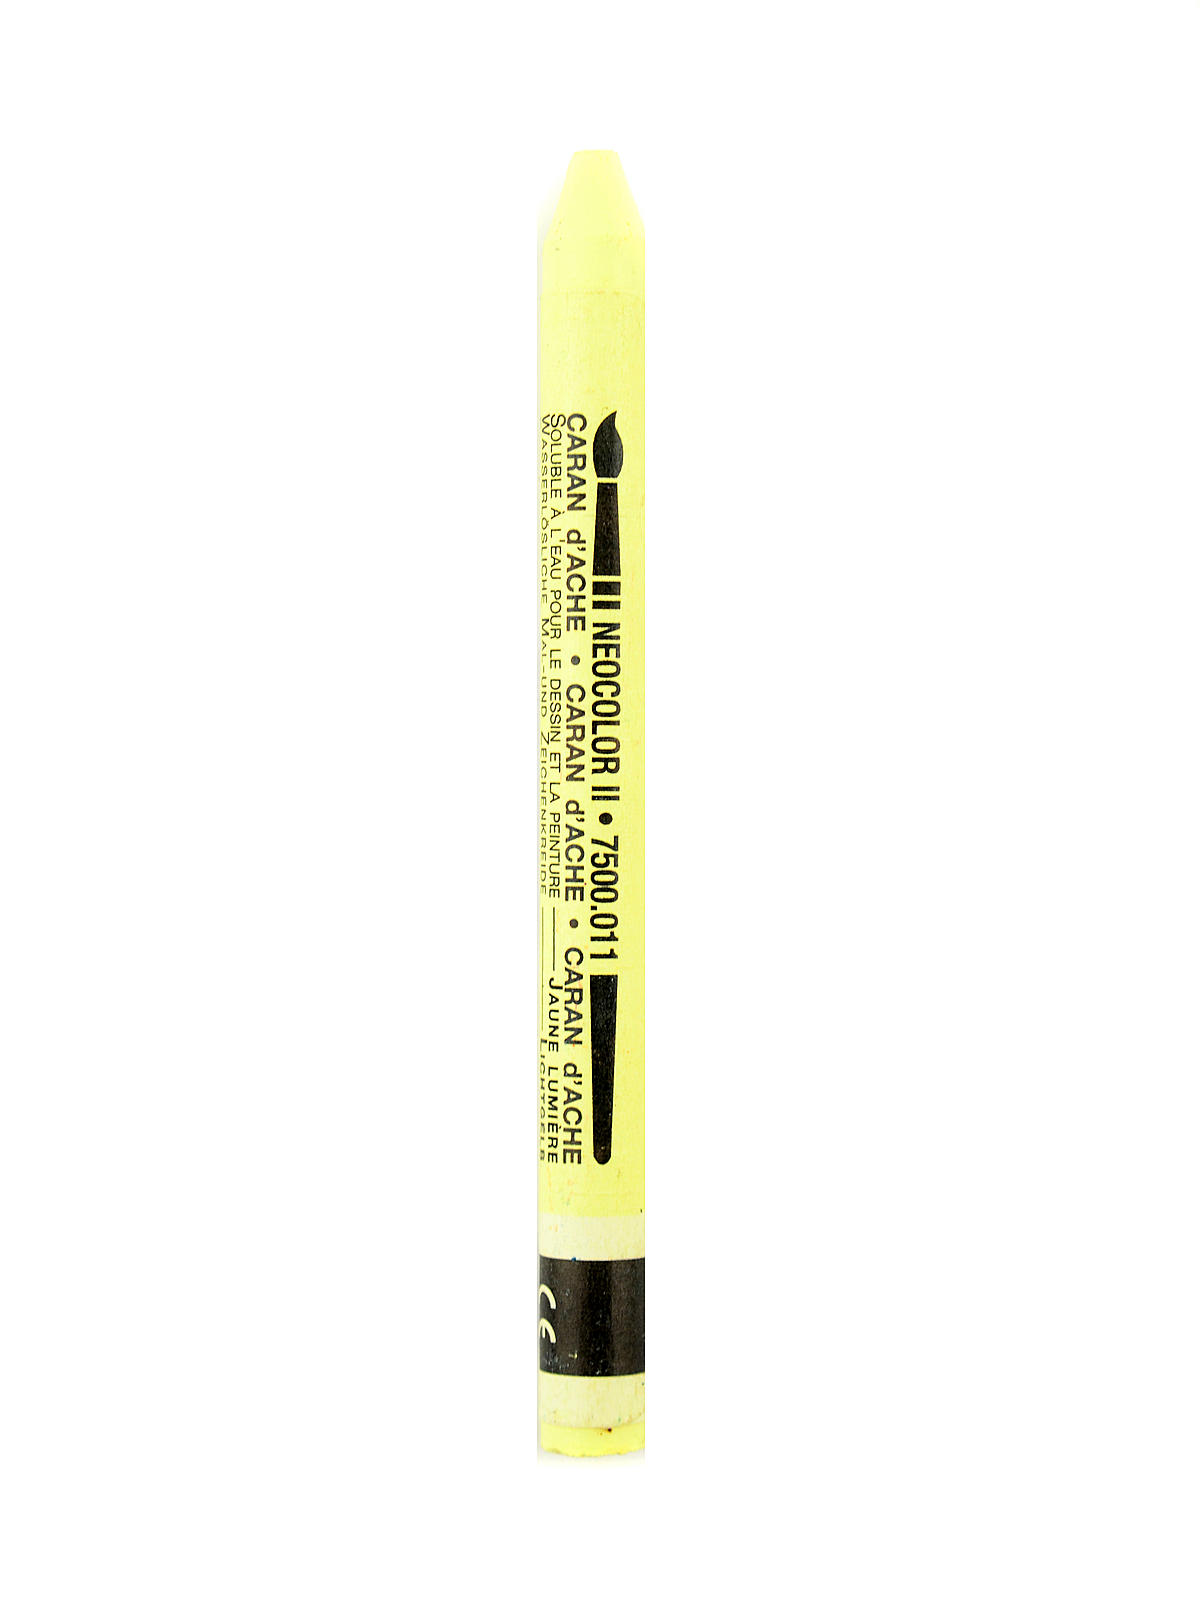 Neocolor Ii Aquarelle Water Soluble Wax Pastels Pale Yellow